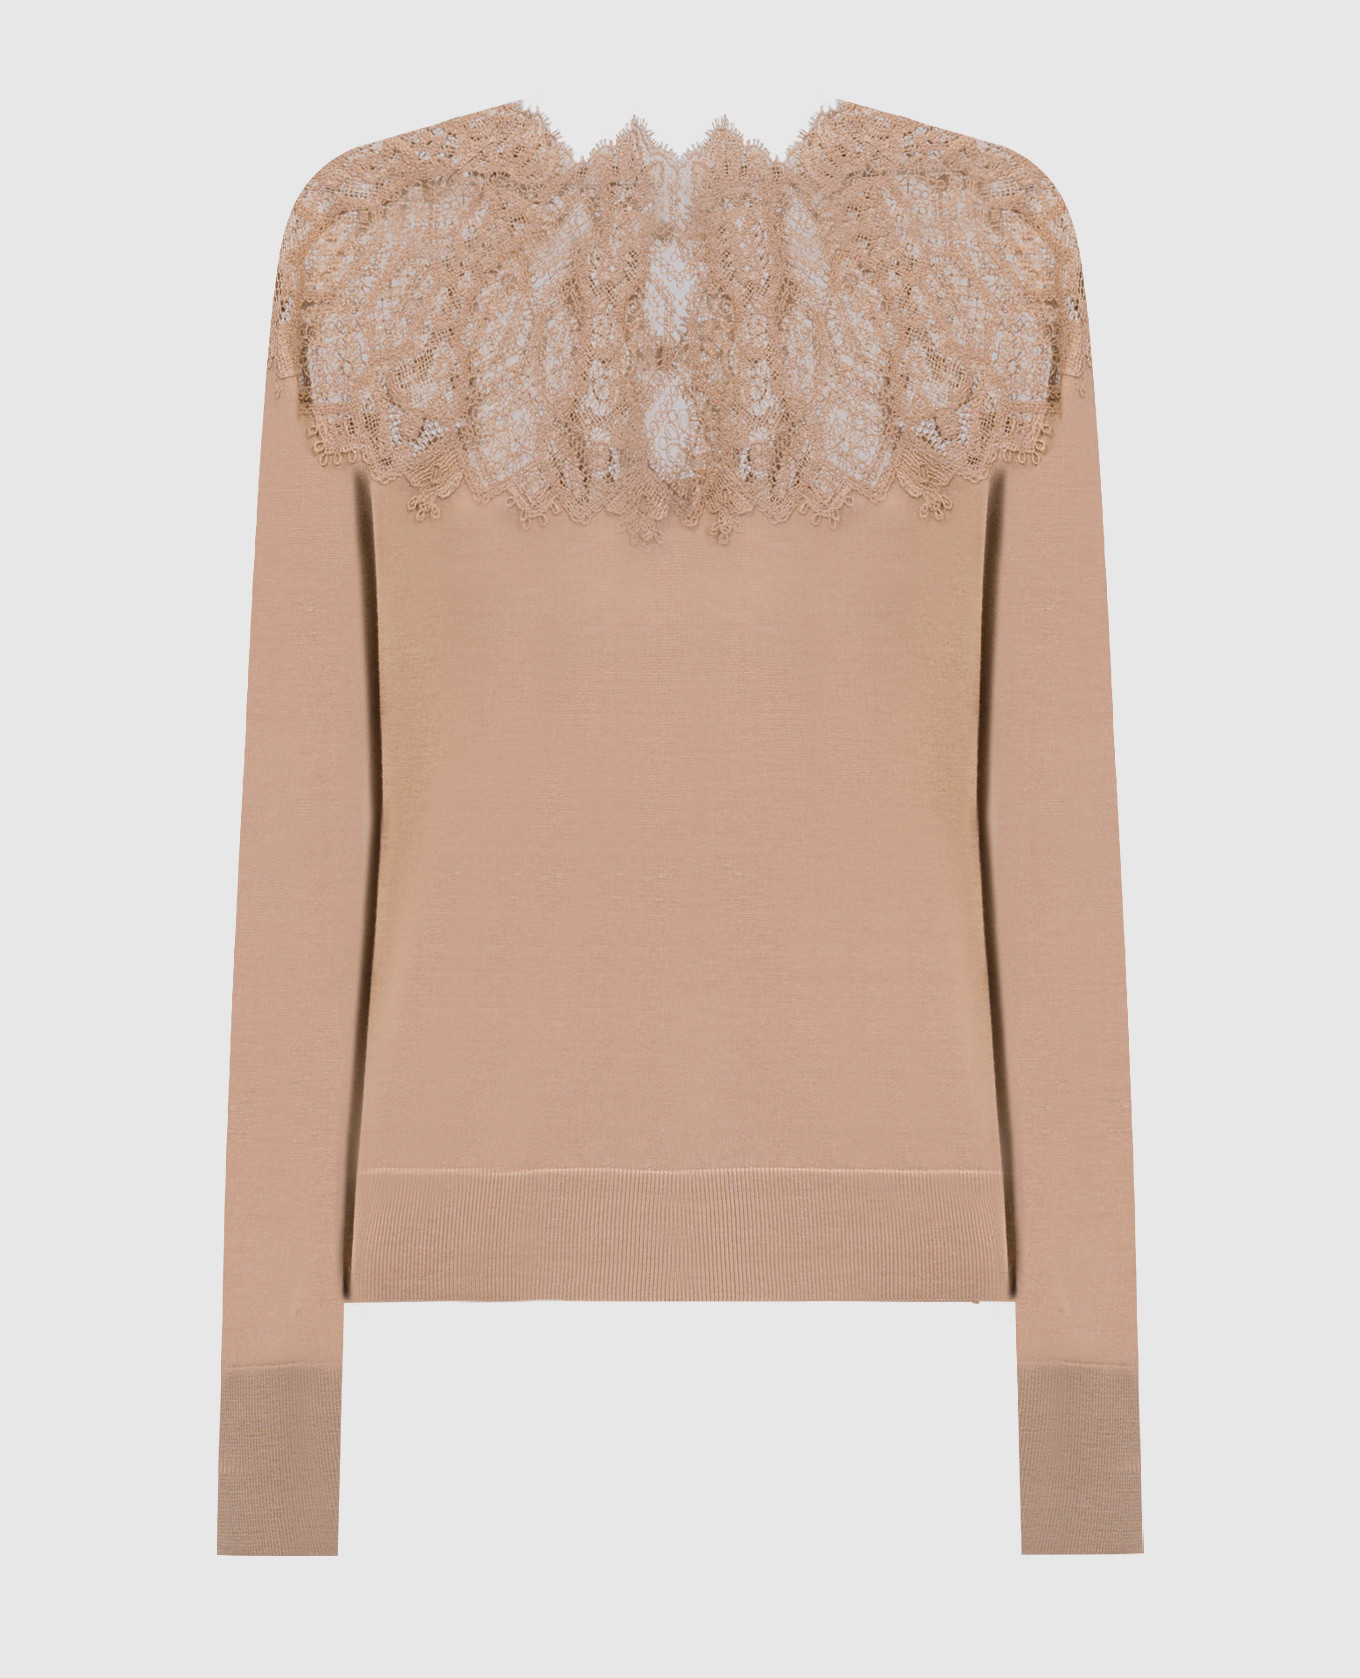 Beige wool jumper with lace